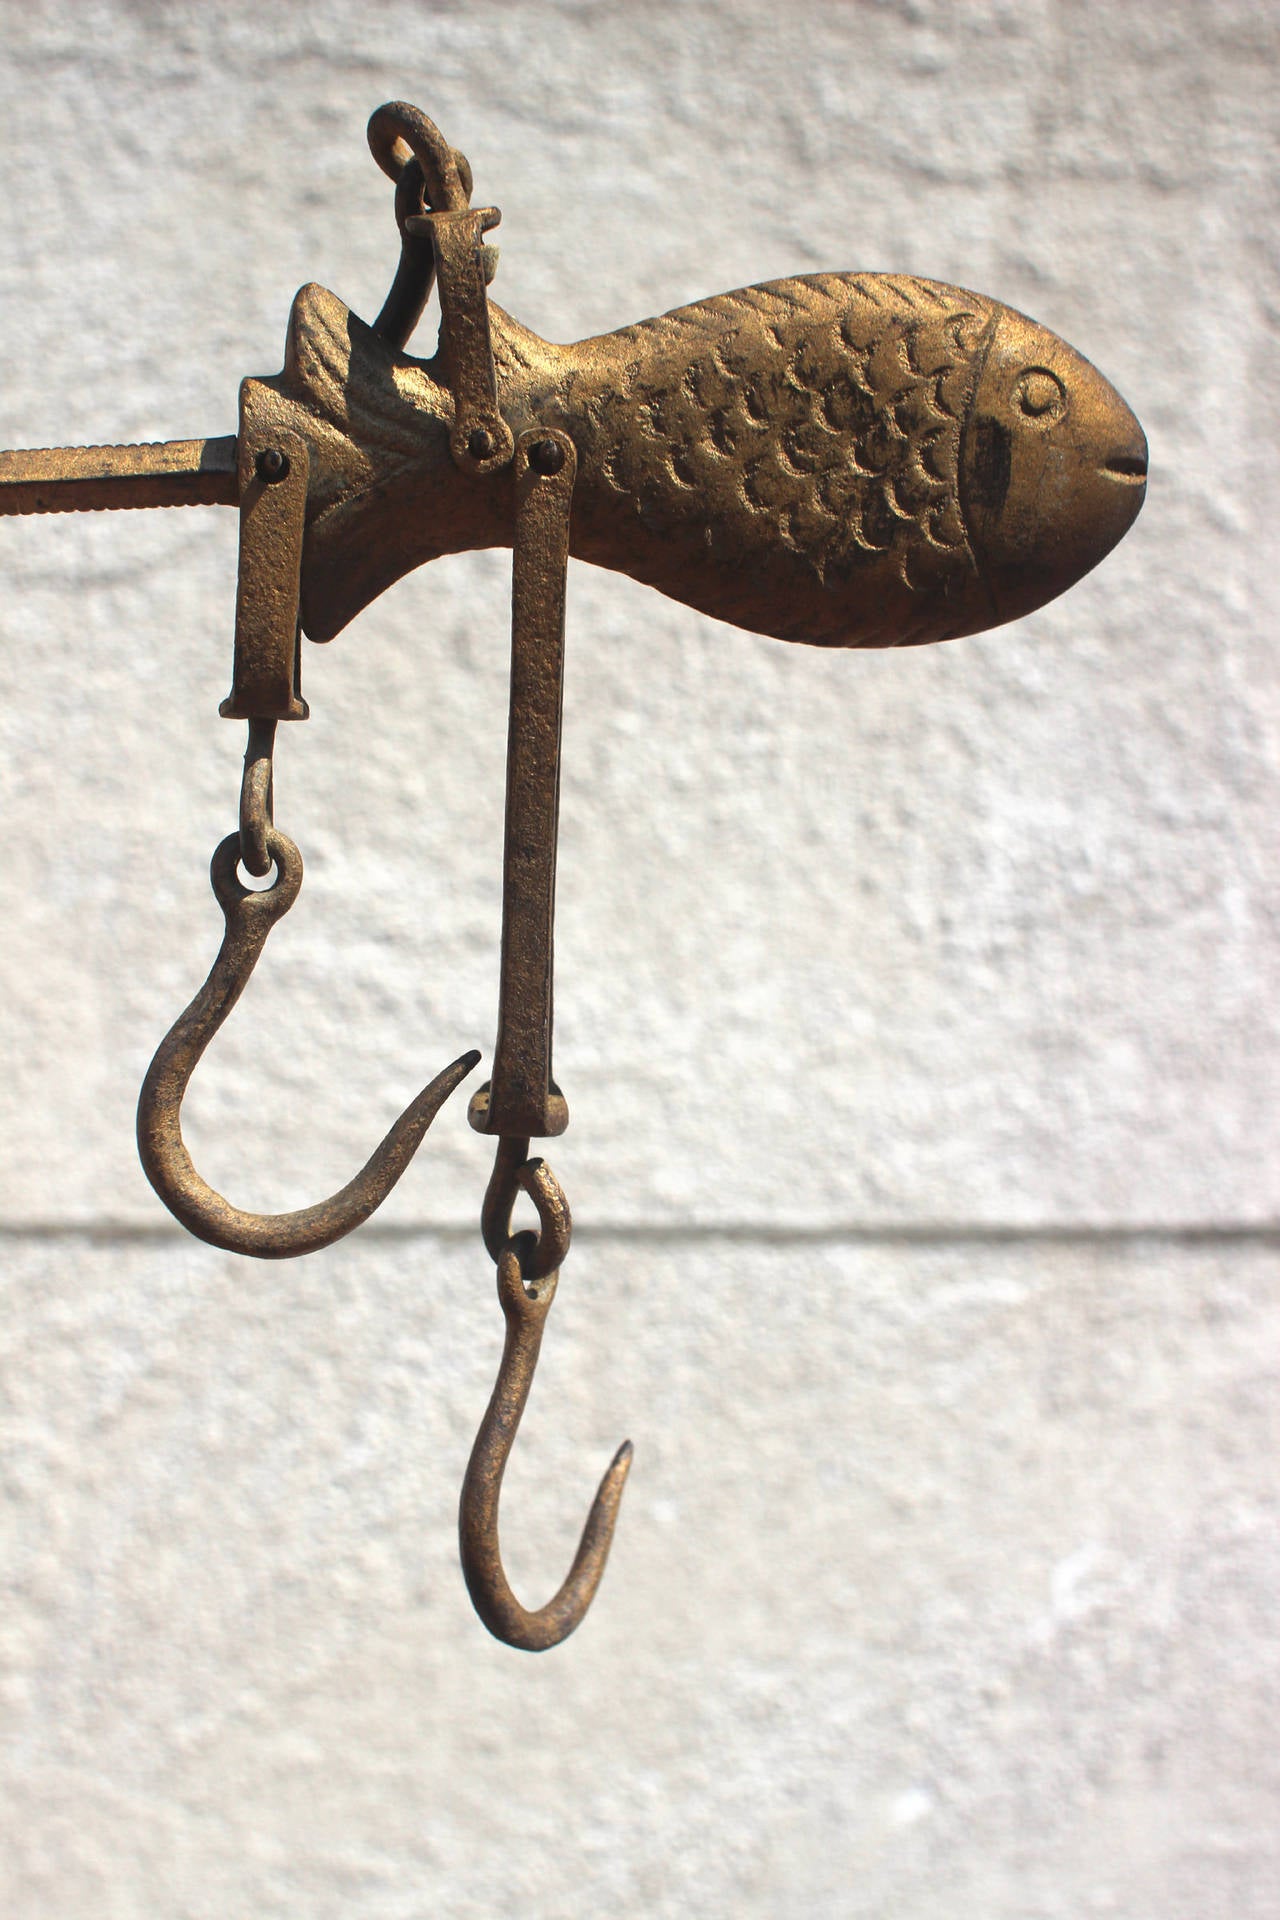 Wonderfully folky iron fish stilliard portable scale in original gold paint - must have been used to weigh fish. Has all of its original hooks and parts.